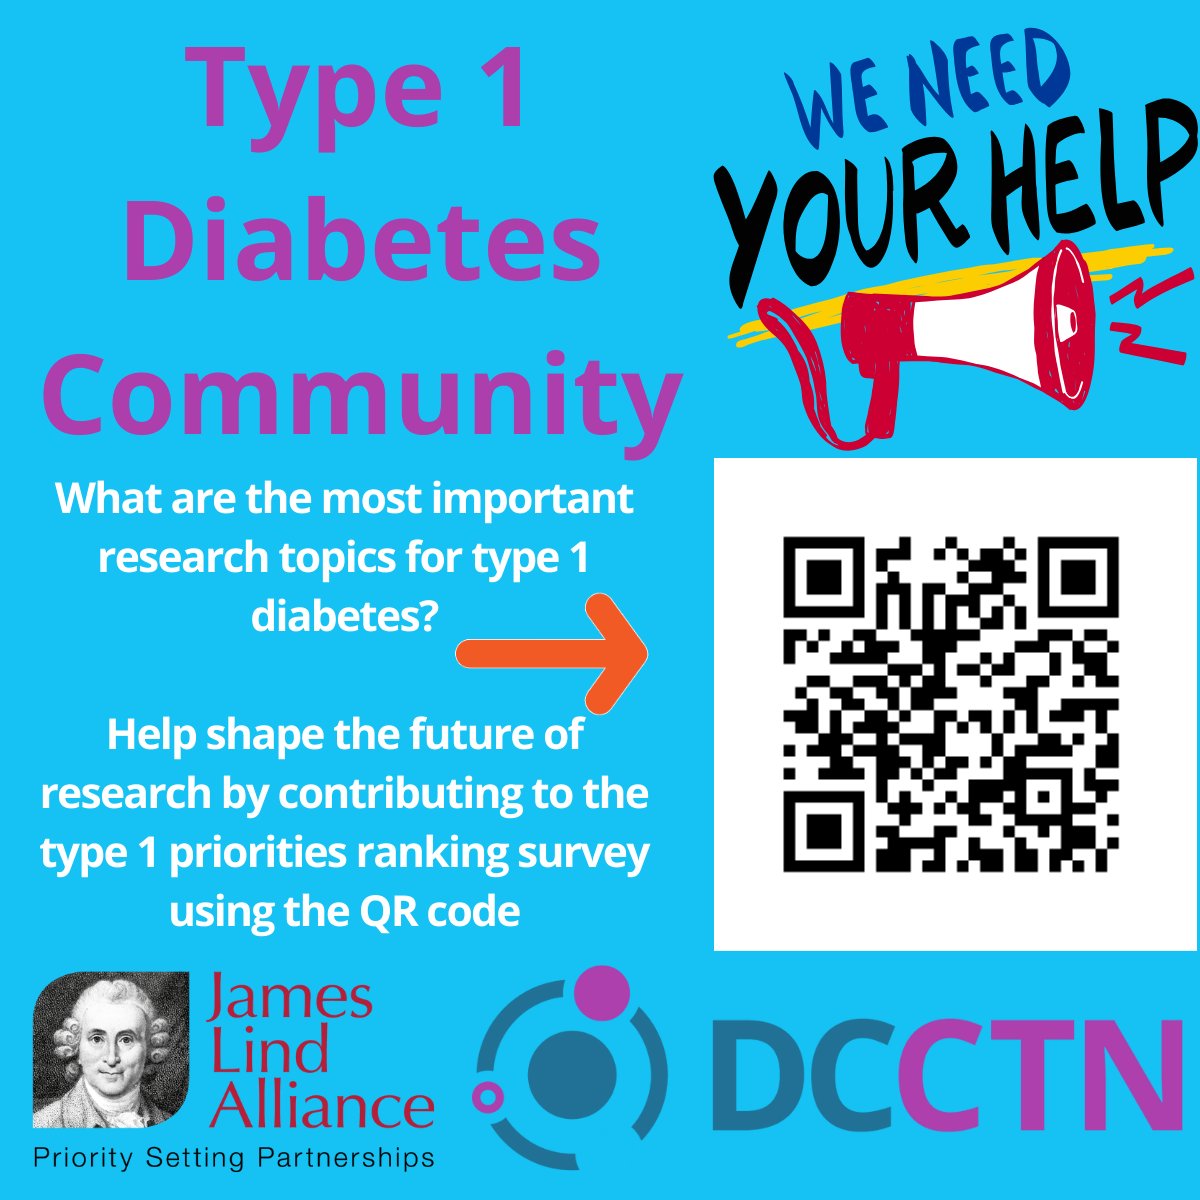 Can you help decide the important questions that should be answered by research to improve the wellbeing of people and families impacted by type 1 diabetes? Find out more and complete the survey here: loom.ly/zBSa8Lw